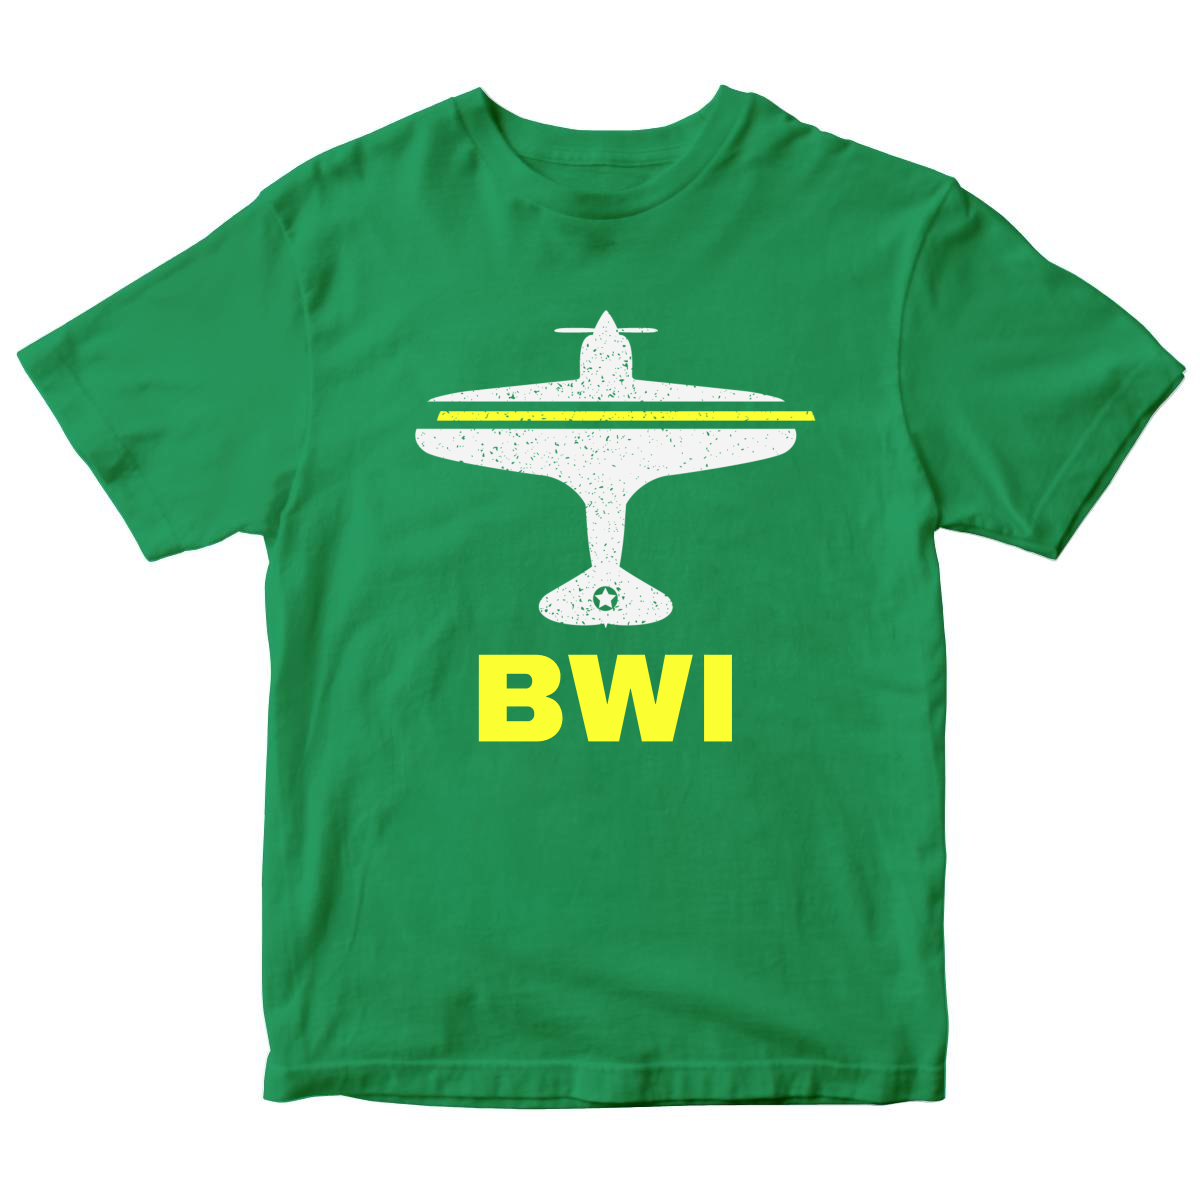 Fly Baltimore BWI Airport Kids T-shirt